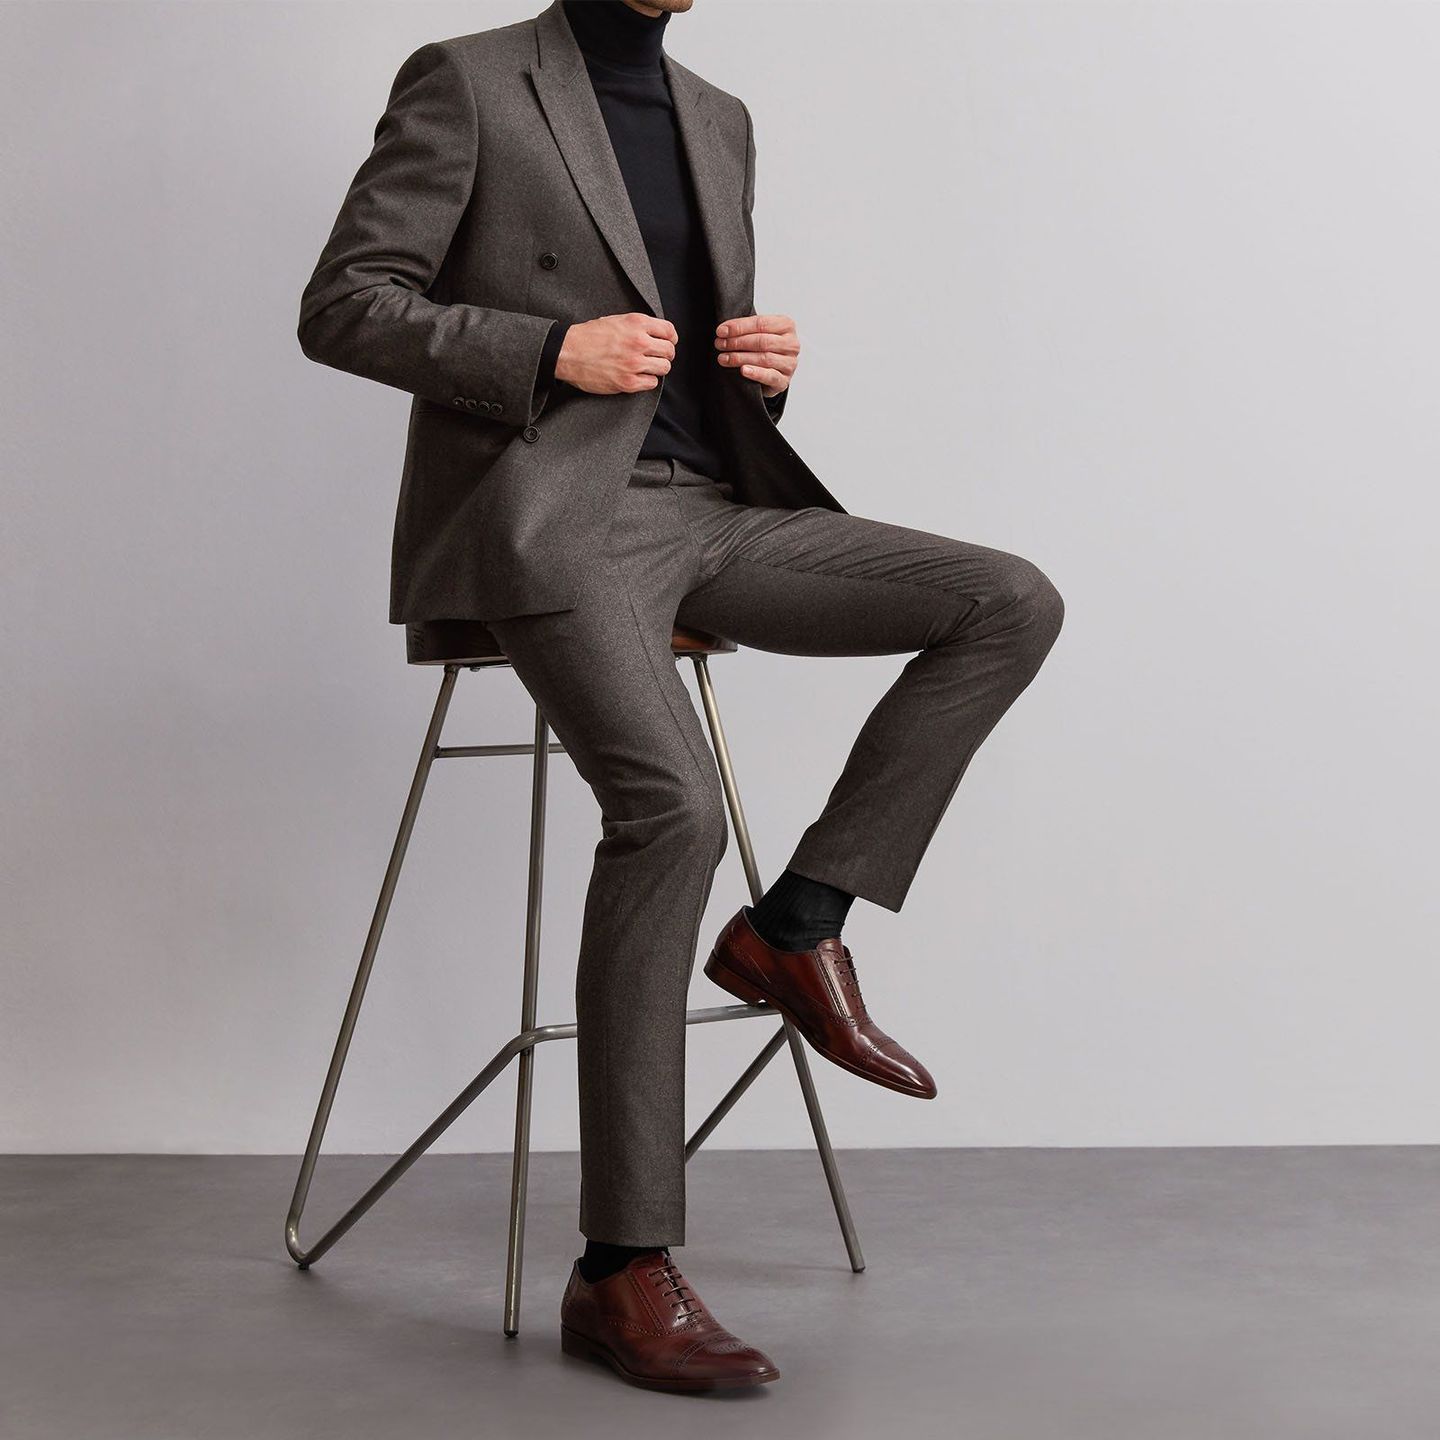 Man sitting in dark grey suit and black socks a matching top and brown shoes